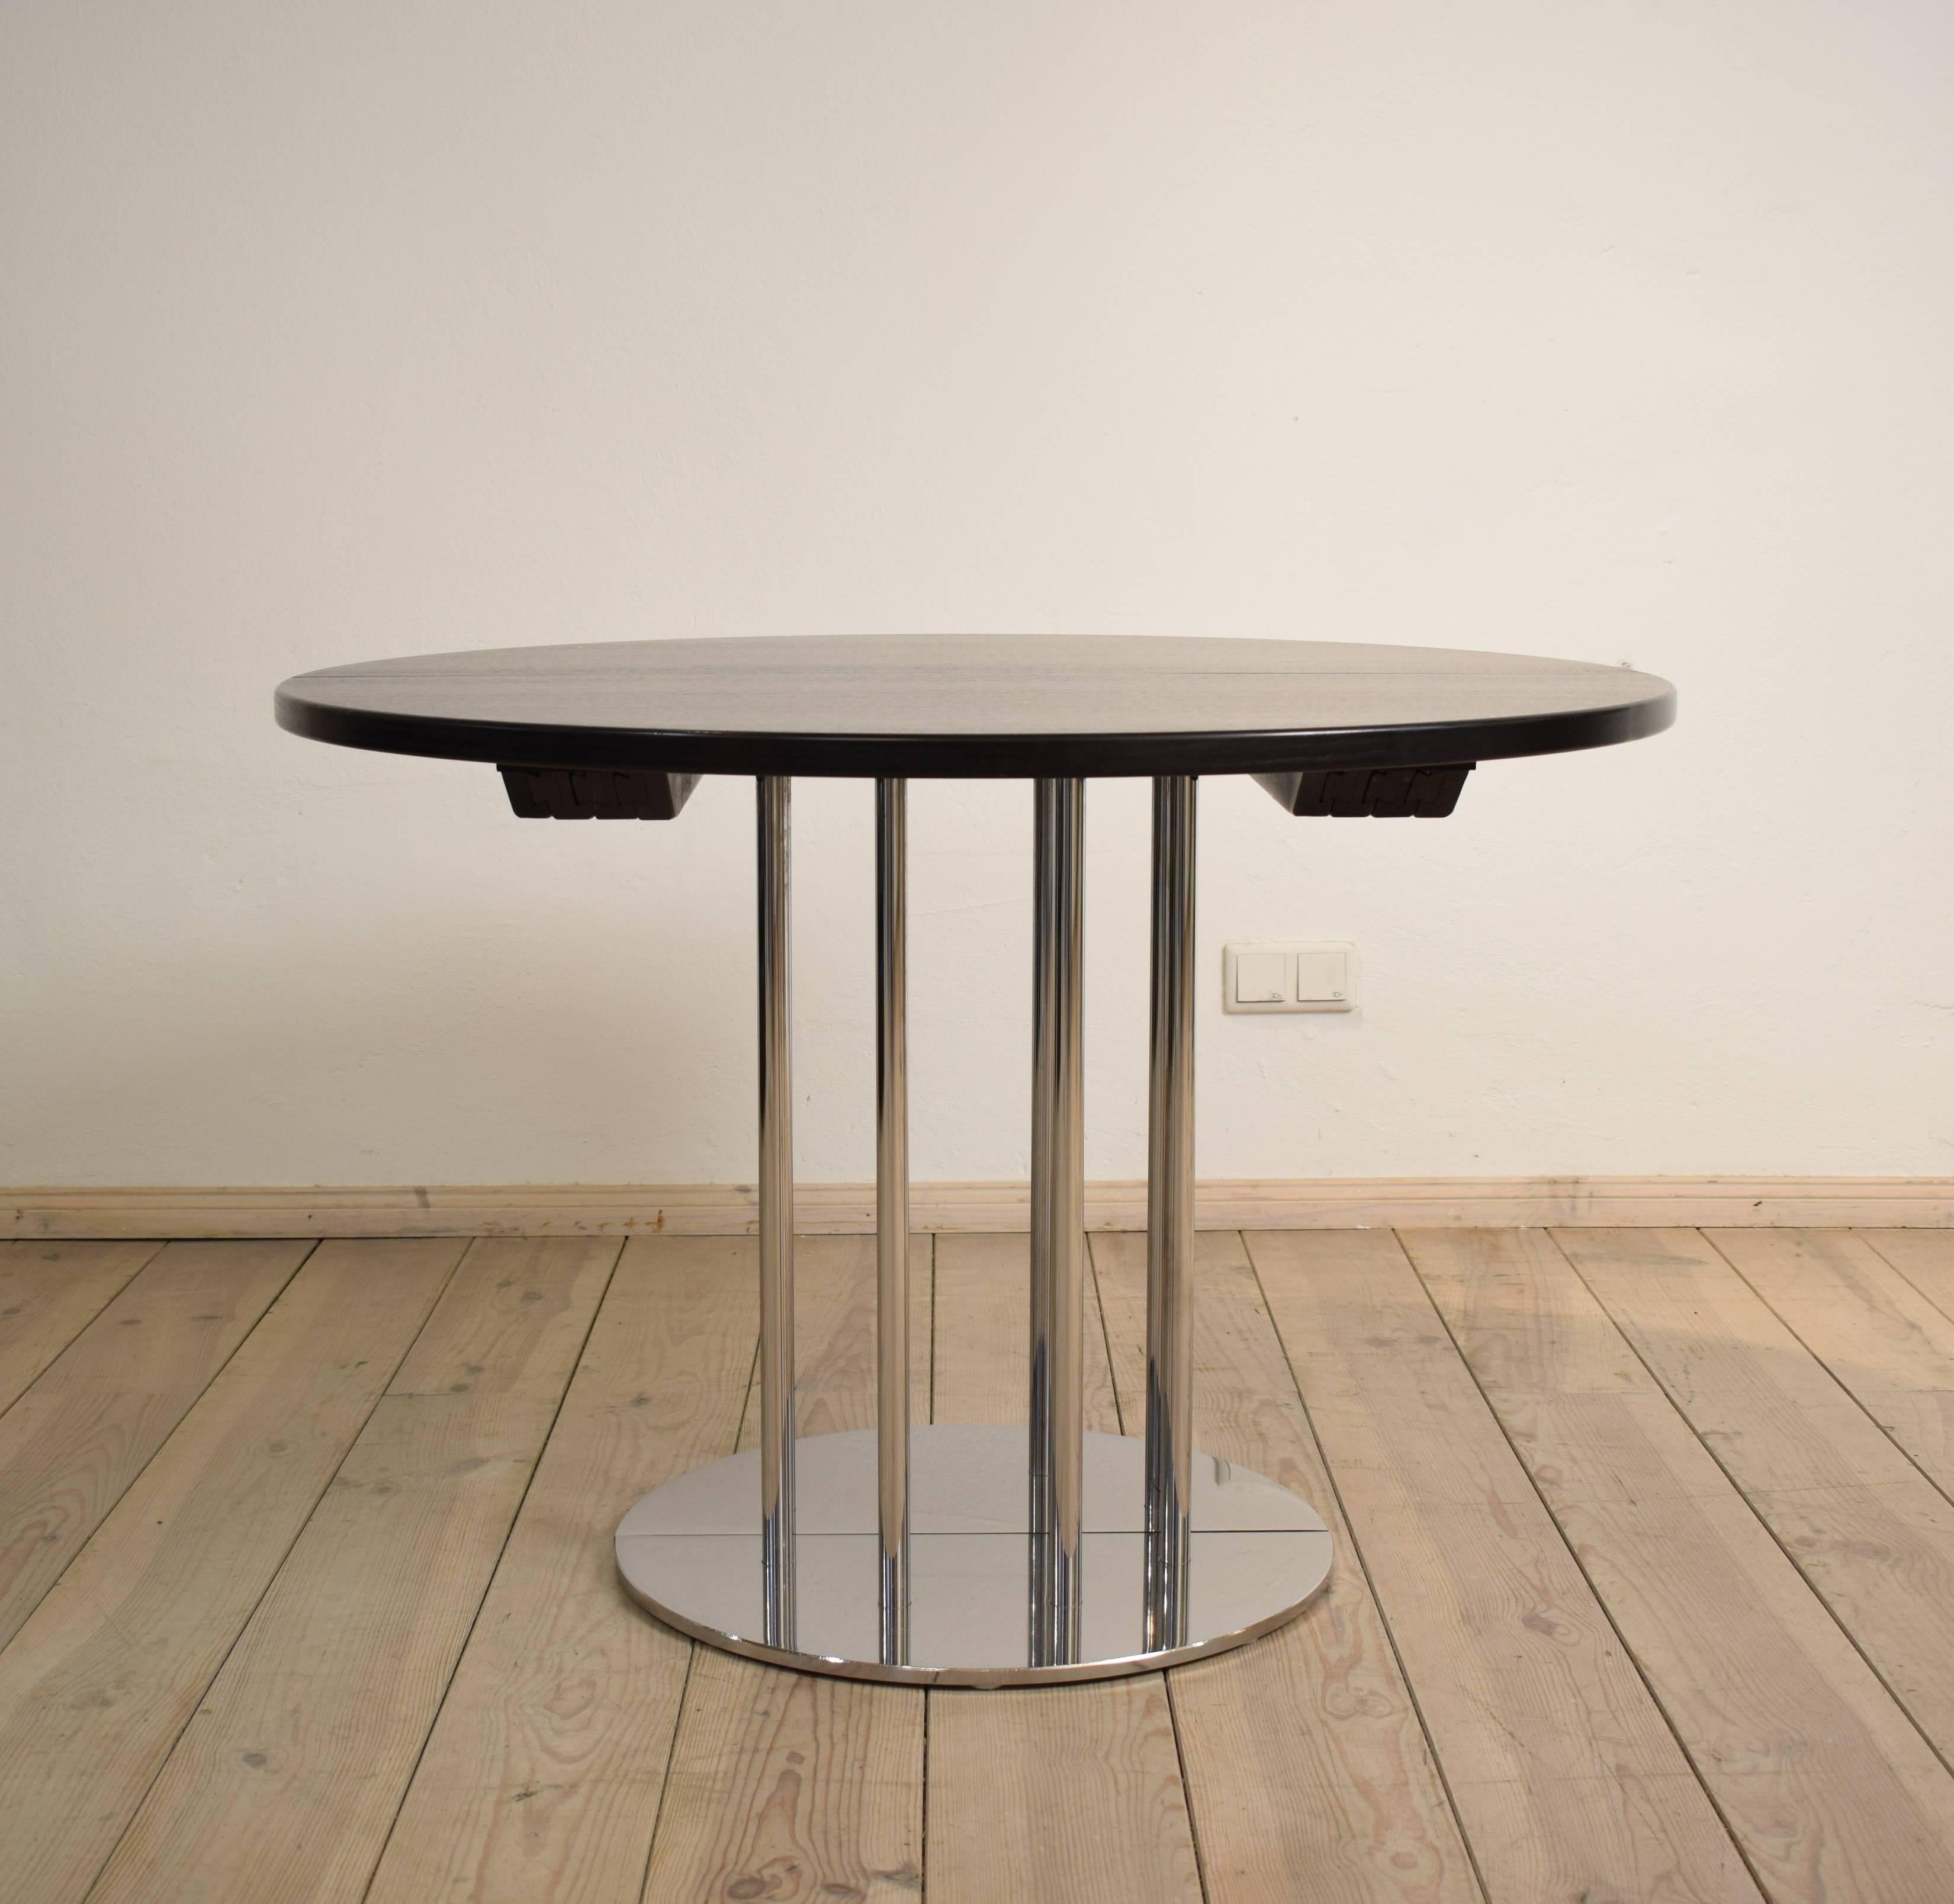 This extendable dining table was designed and manufactured in the 1986 by Thonet.
The table has a solid and valuable chrome-plated base and a massive blackened oak top. A very high quality worked table.
The top comes with two inlay leaves and can be